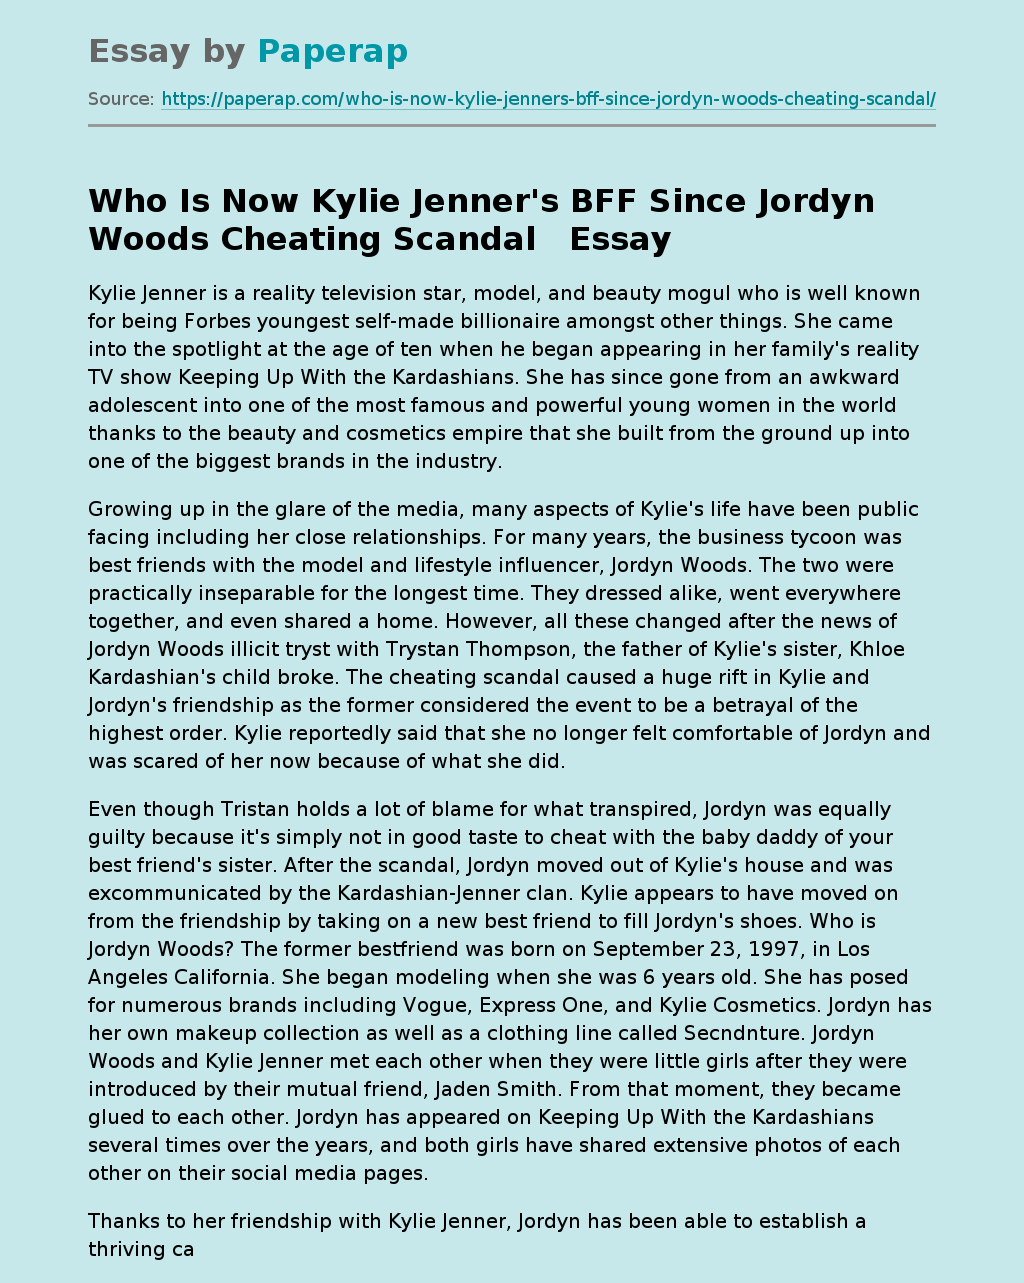 Who Is Now Kylie Jenner's BFF Since Jordyn Woods Cheating Scandal  